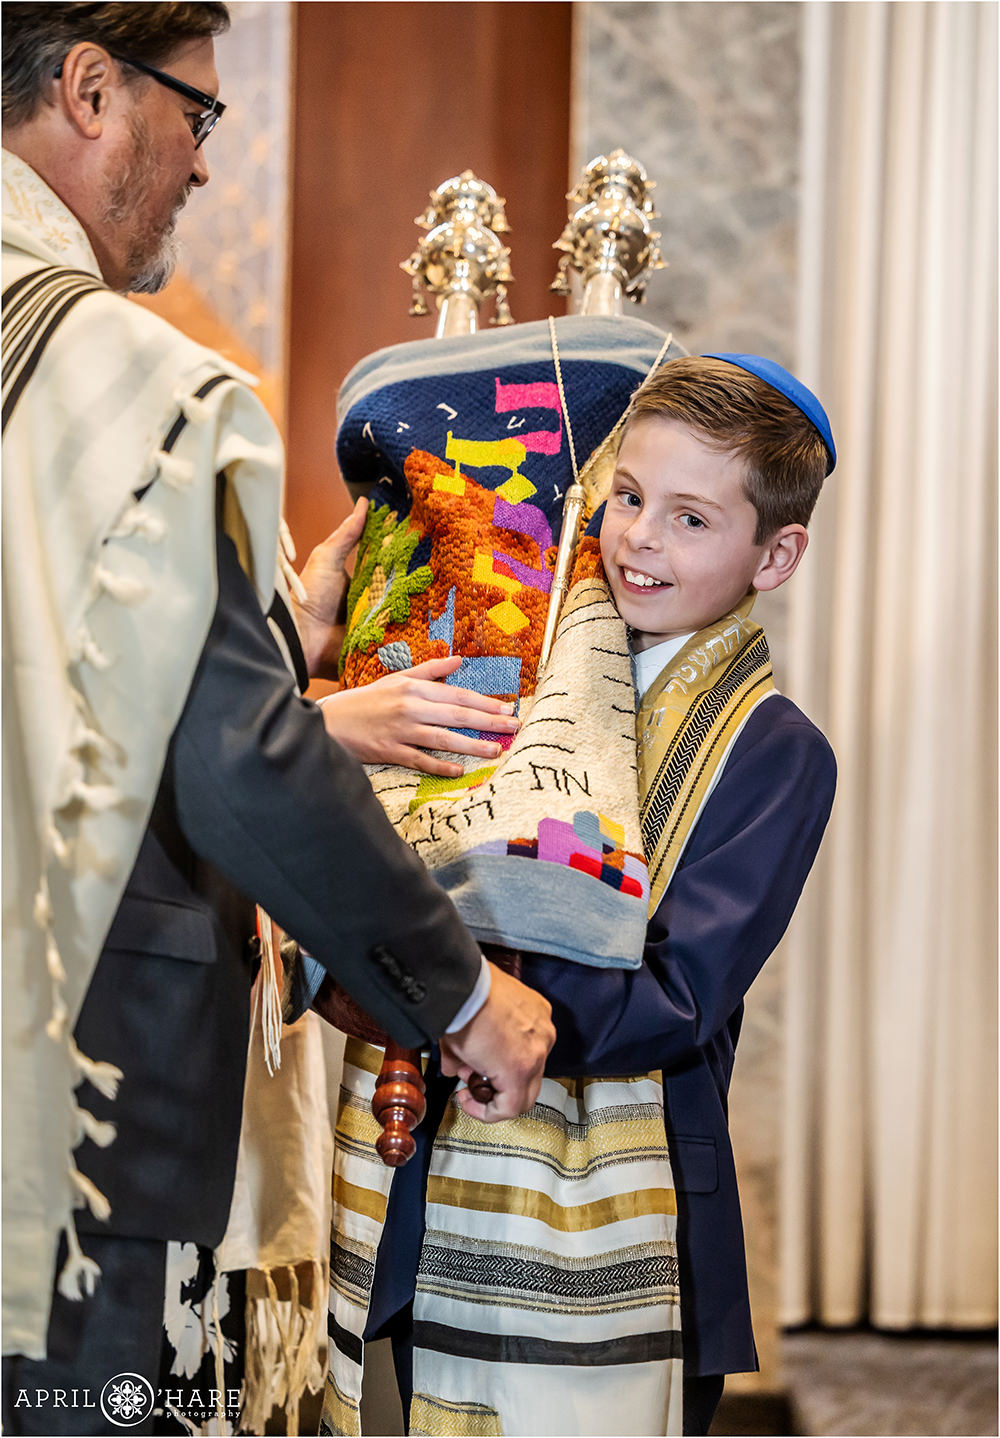 Bar Mitzvah boy holds the Torah at his rehearsal at Temple Sinai in Denver